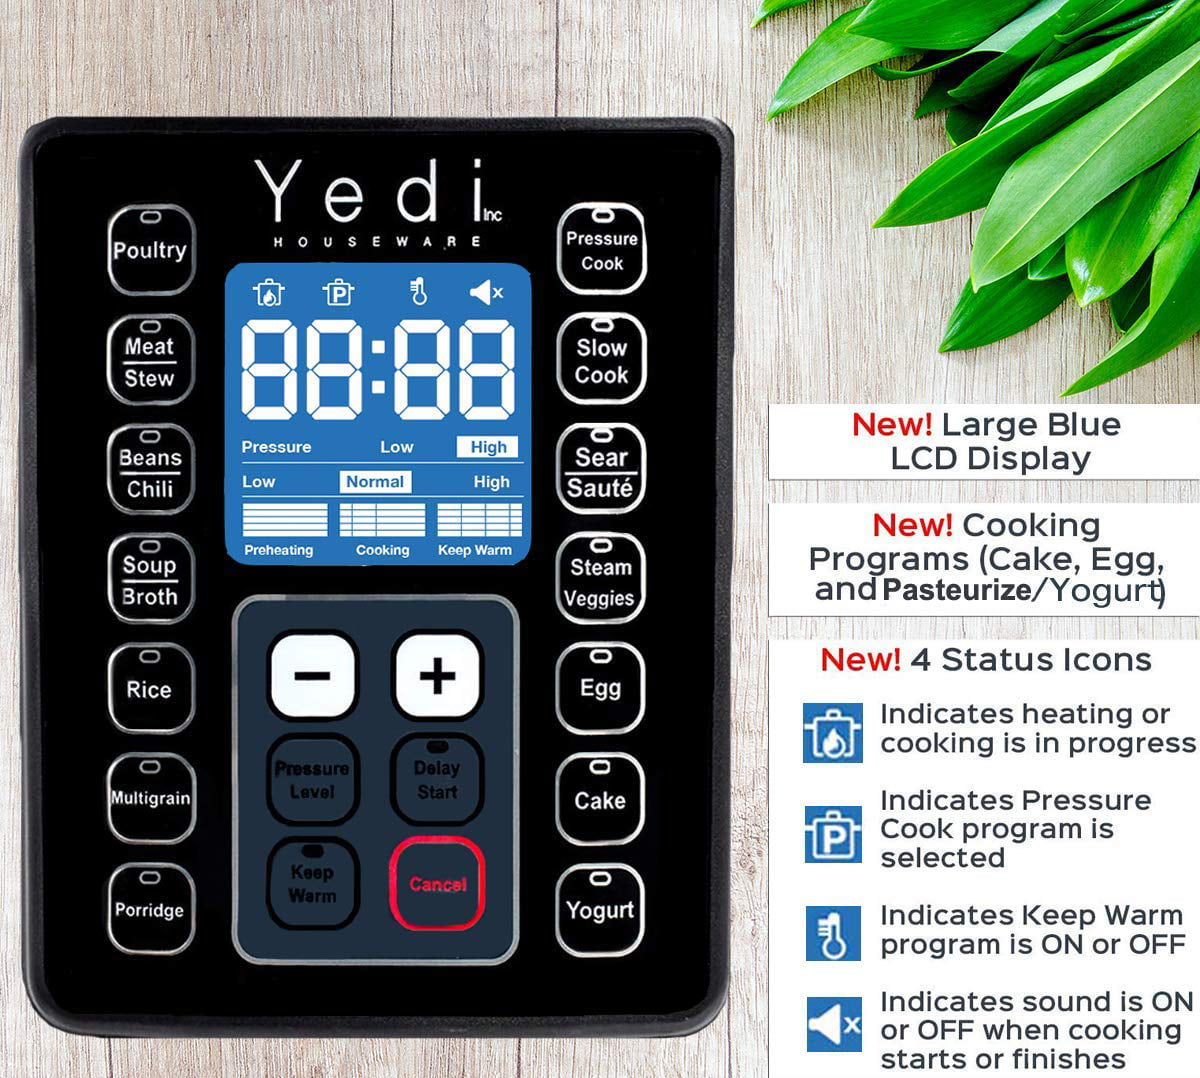 Yedi 9-in-1 Programmable Pressure Cooker Review - Best Electric Pressure  Cooker on  